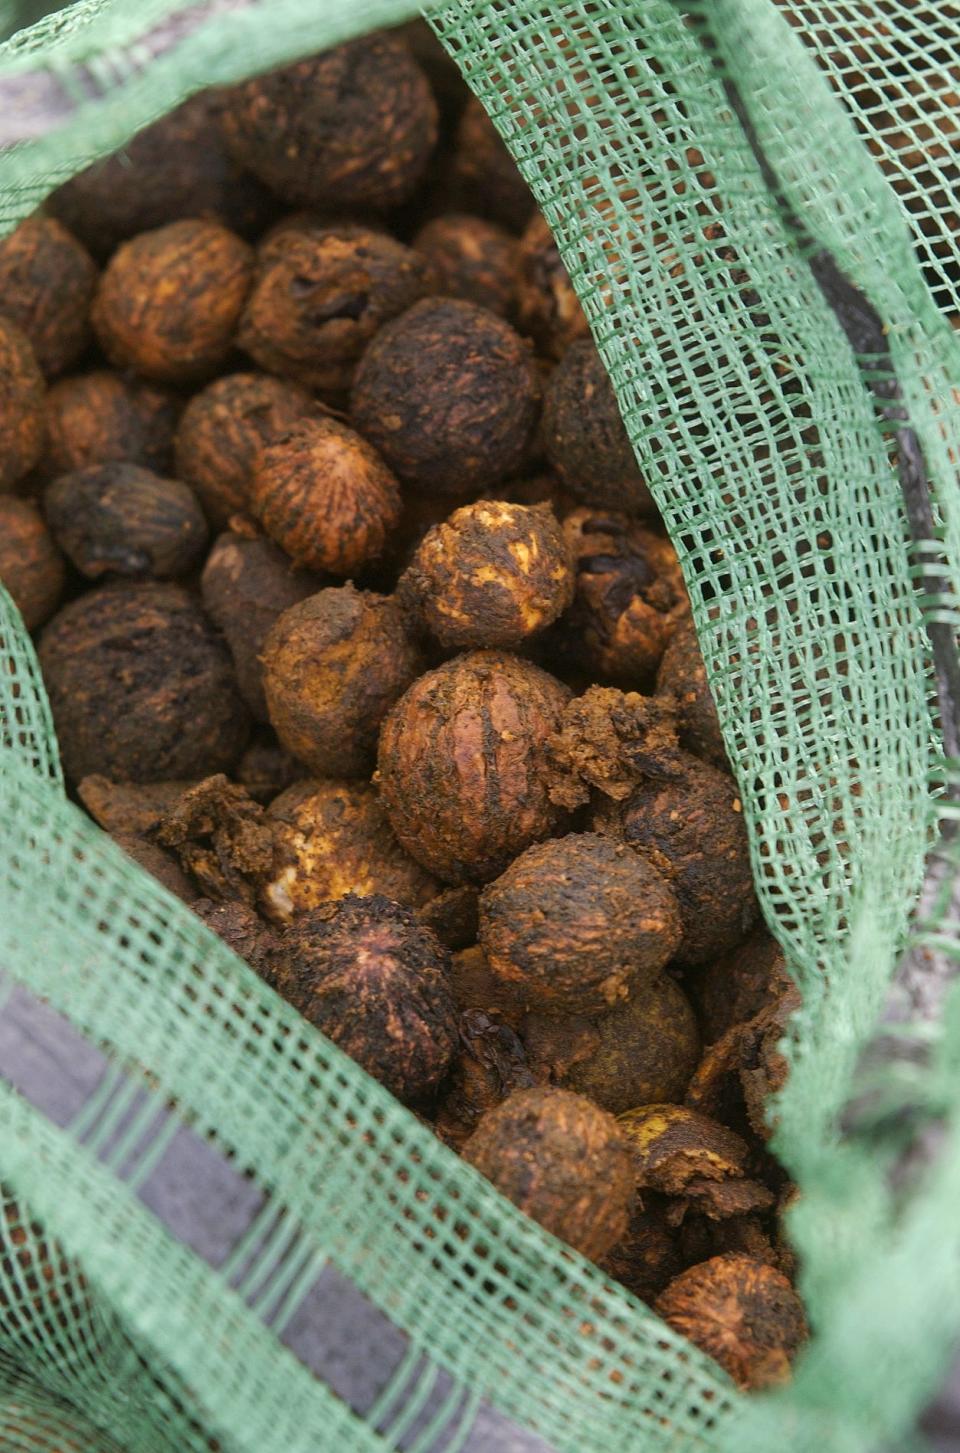 Black walnuts displayed in a News-Leader file photo.